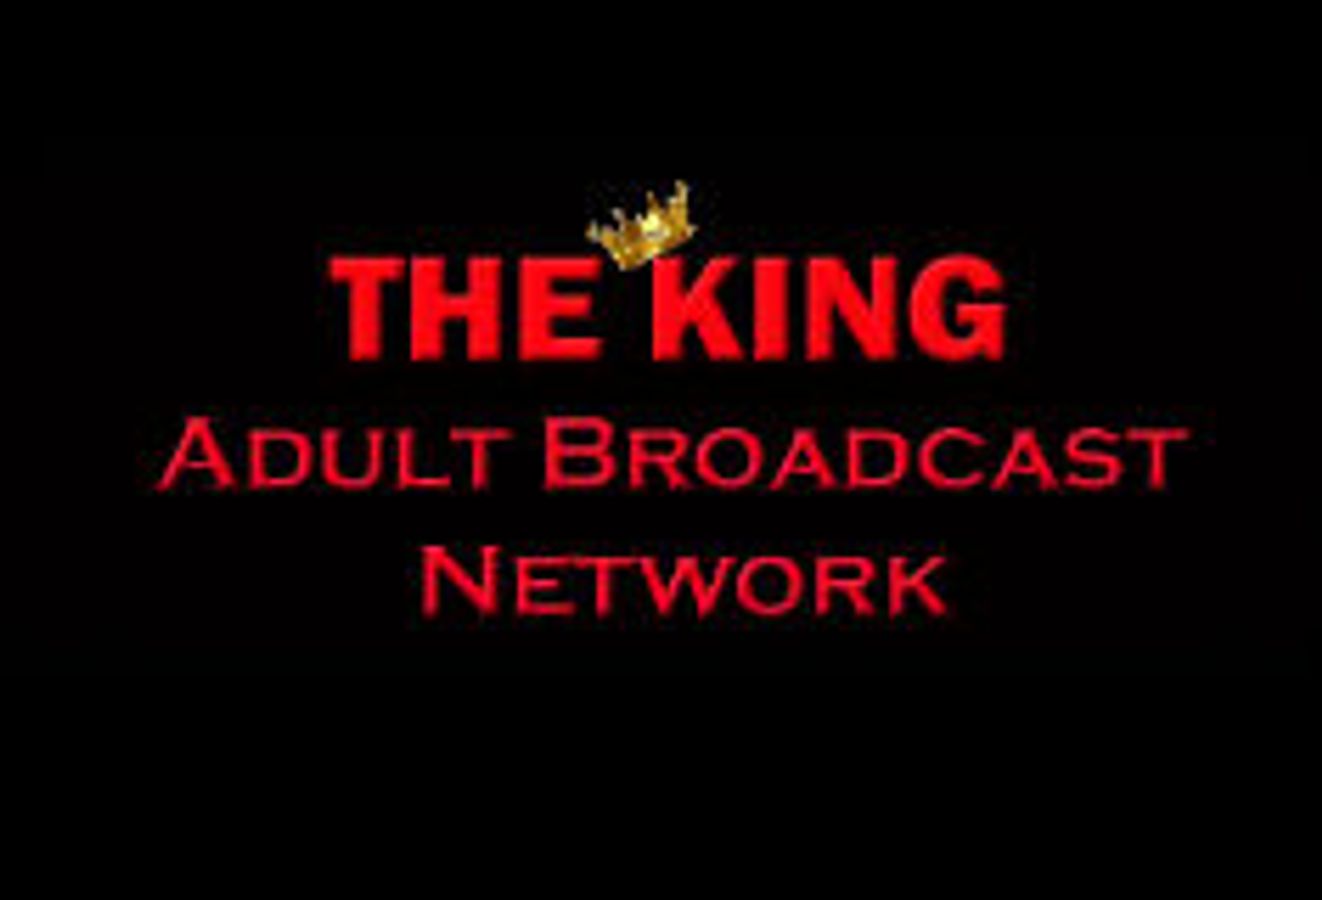 The King Adult Broadcasting Network